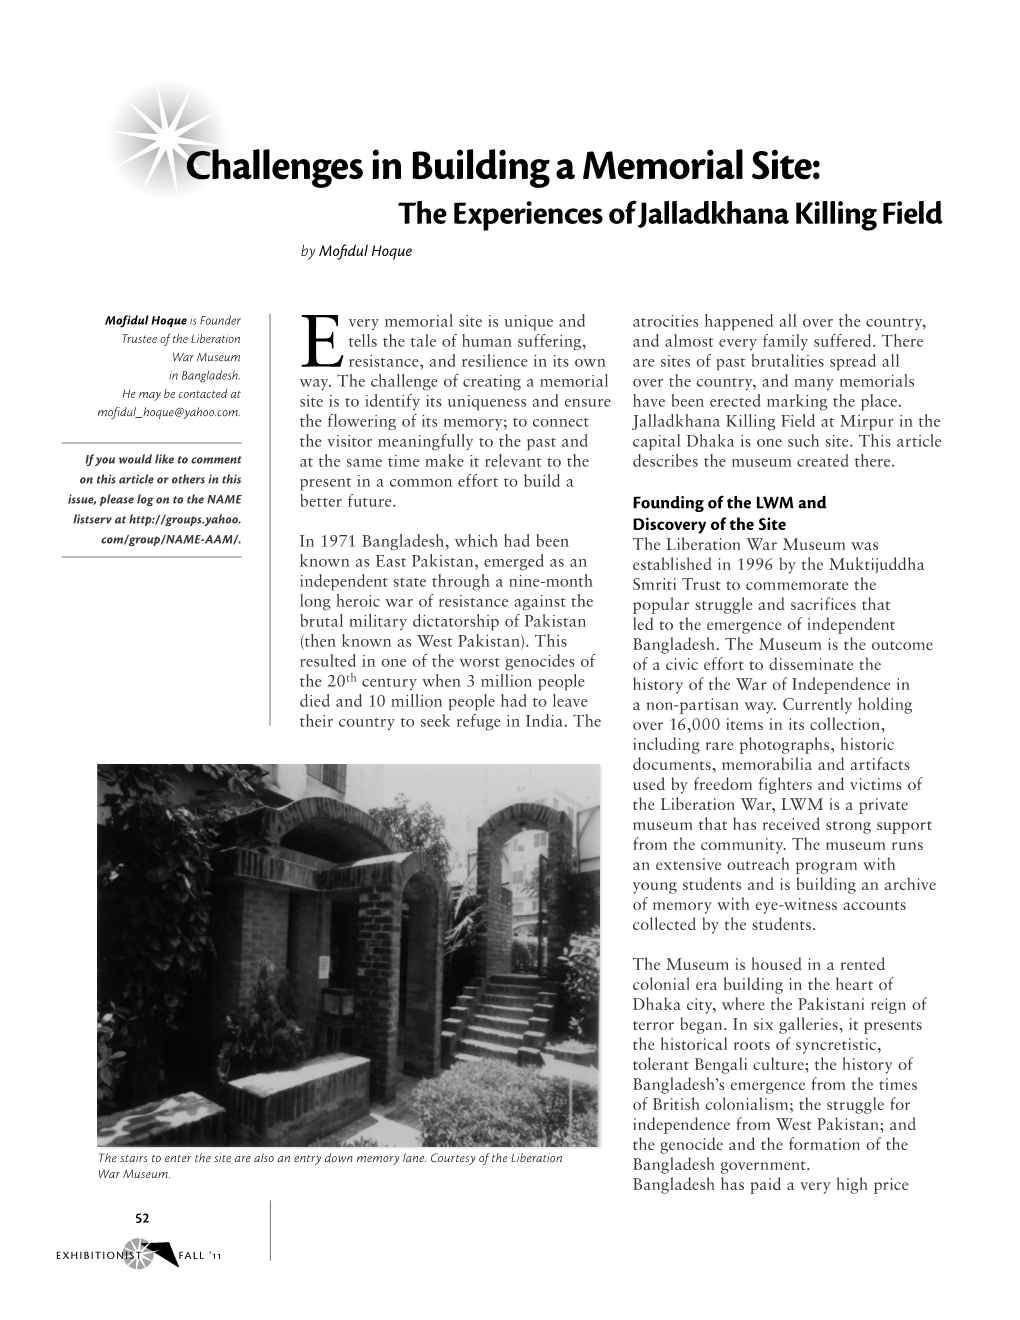 Challenges in Building a Memorial Site: the Experiences of Jalladkhana Killing Field by Mofidul Hoque